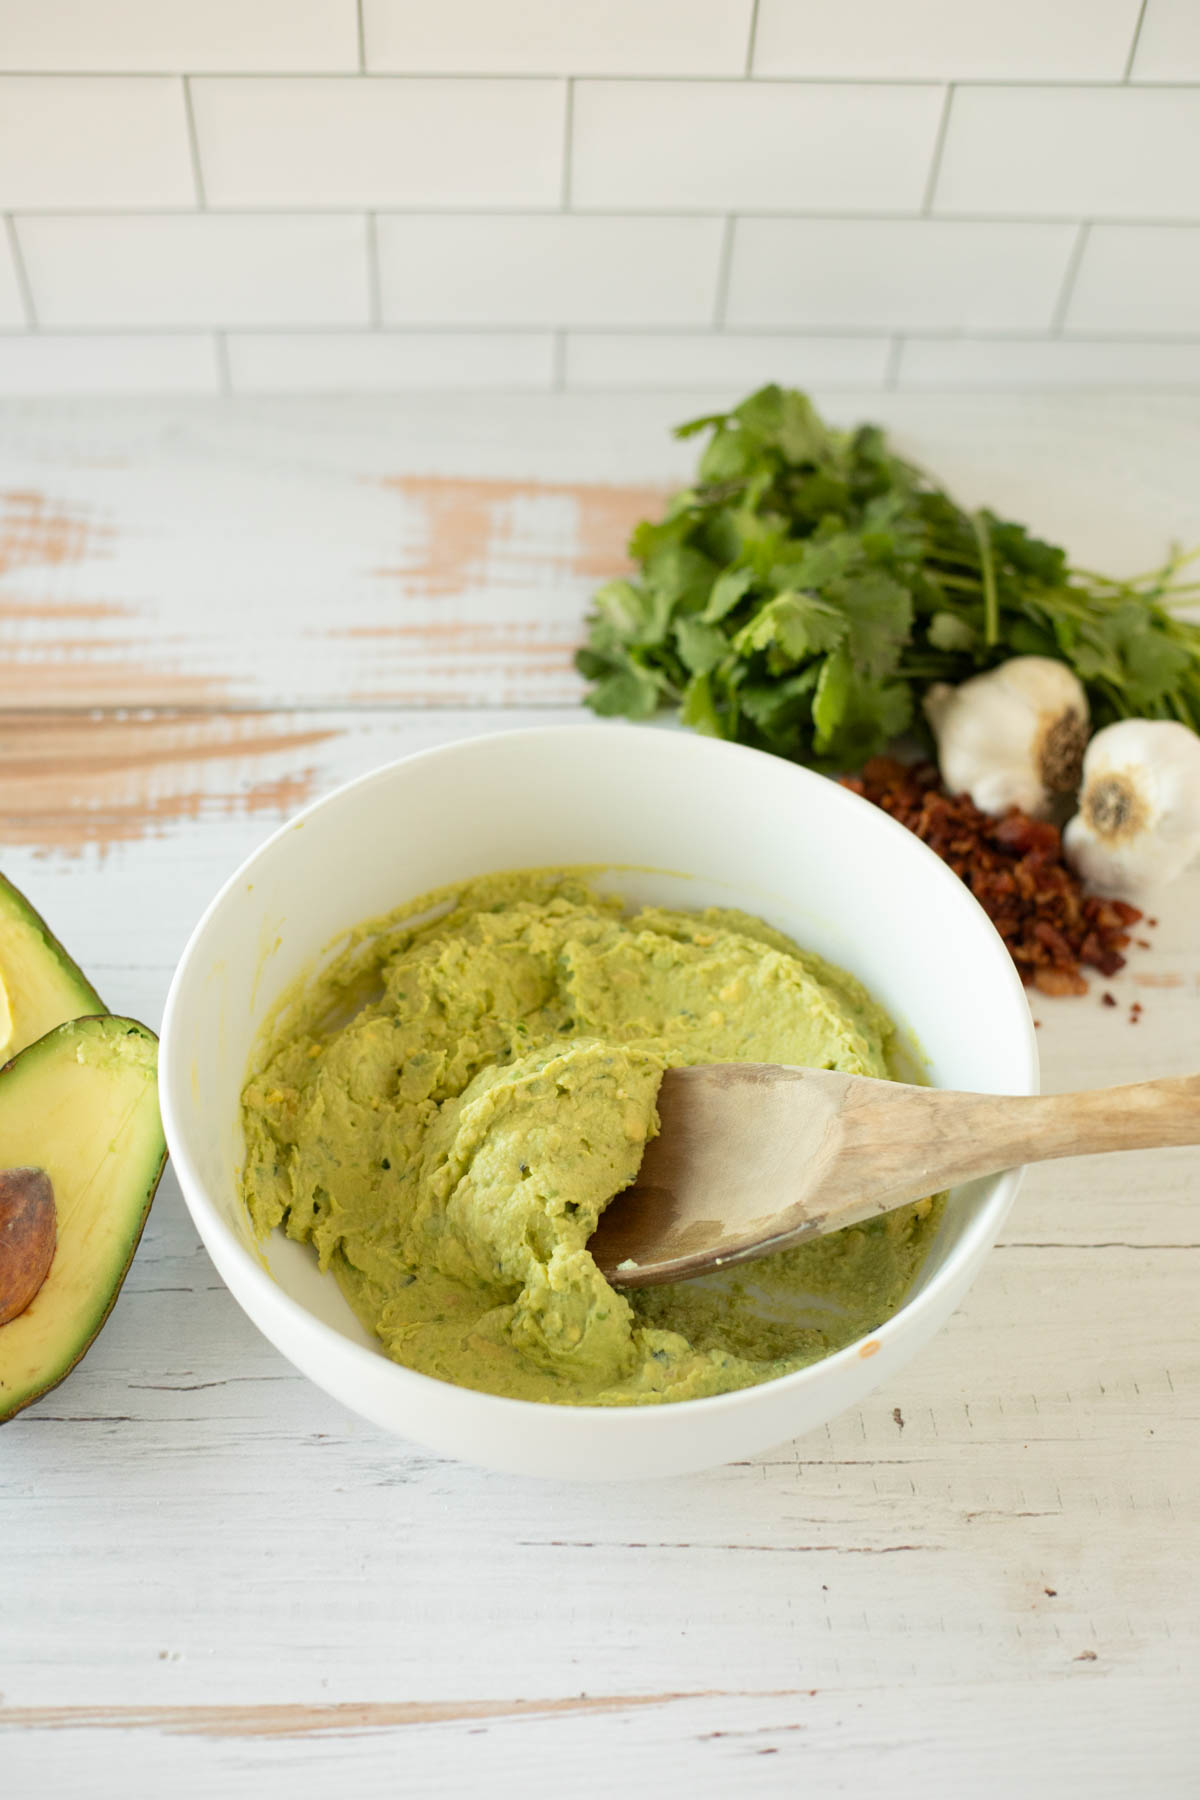 A bowl of freshly made avocado mixture with a wooden spoon on a kitchen counter.